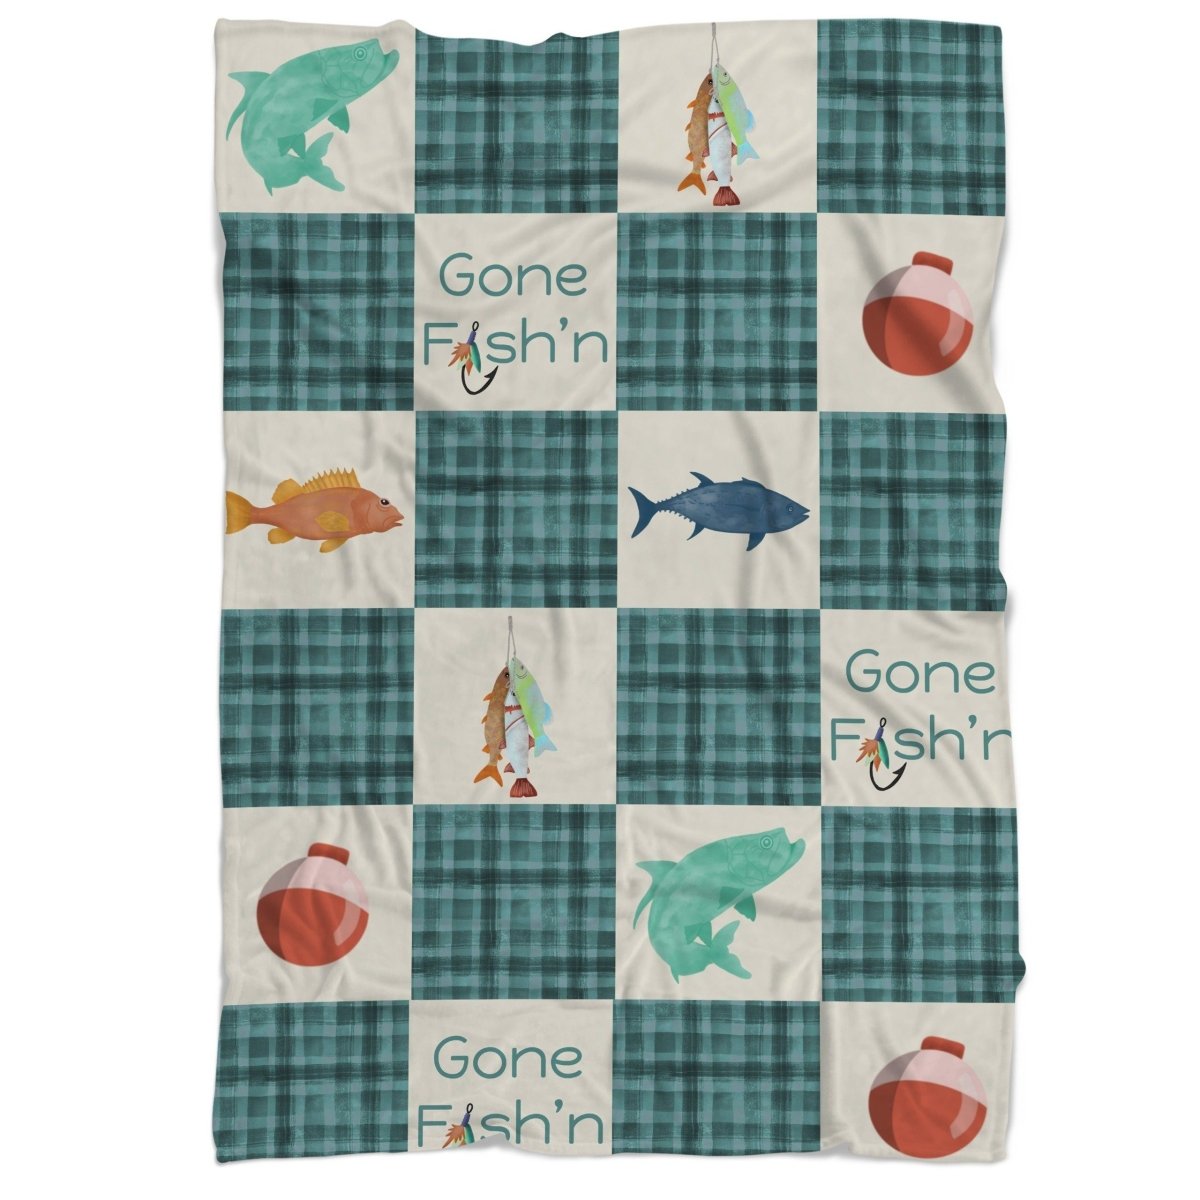 Fishing Time Faux Patchwork Cuddle Blanket - Fishing Time, gender_boy, Personalized_No